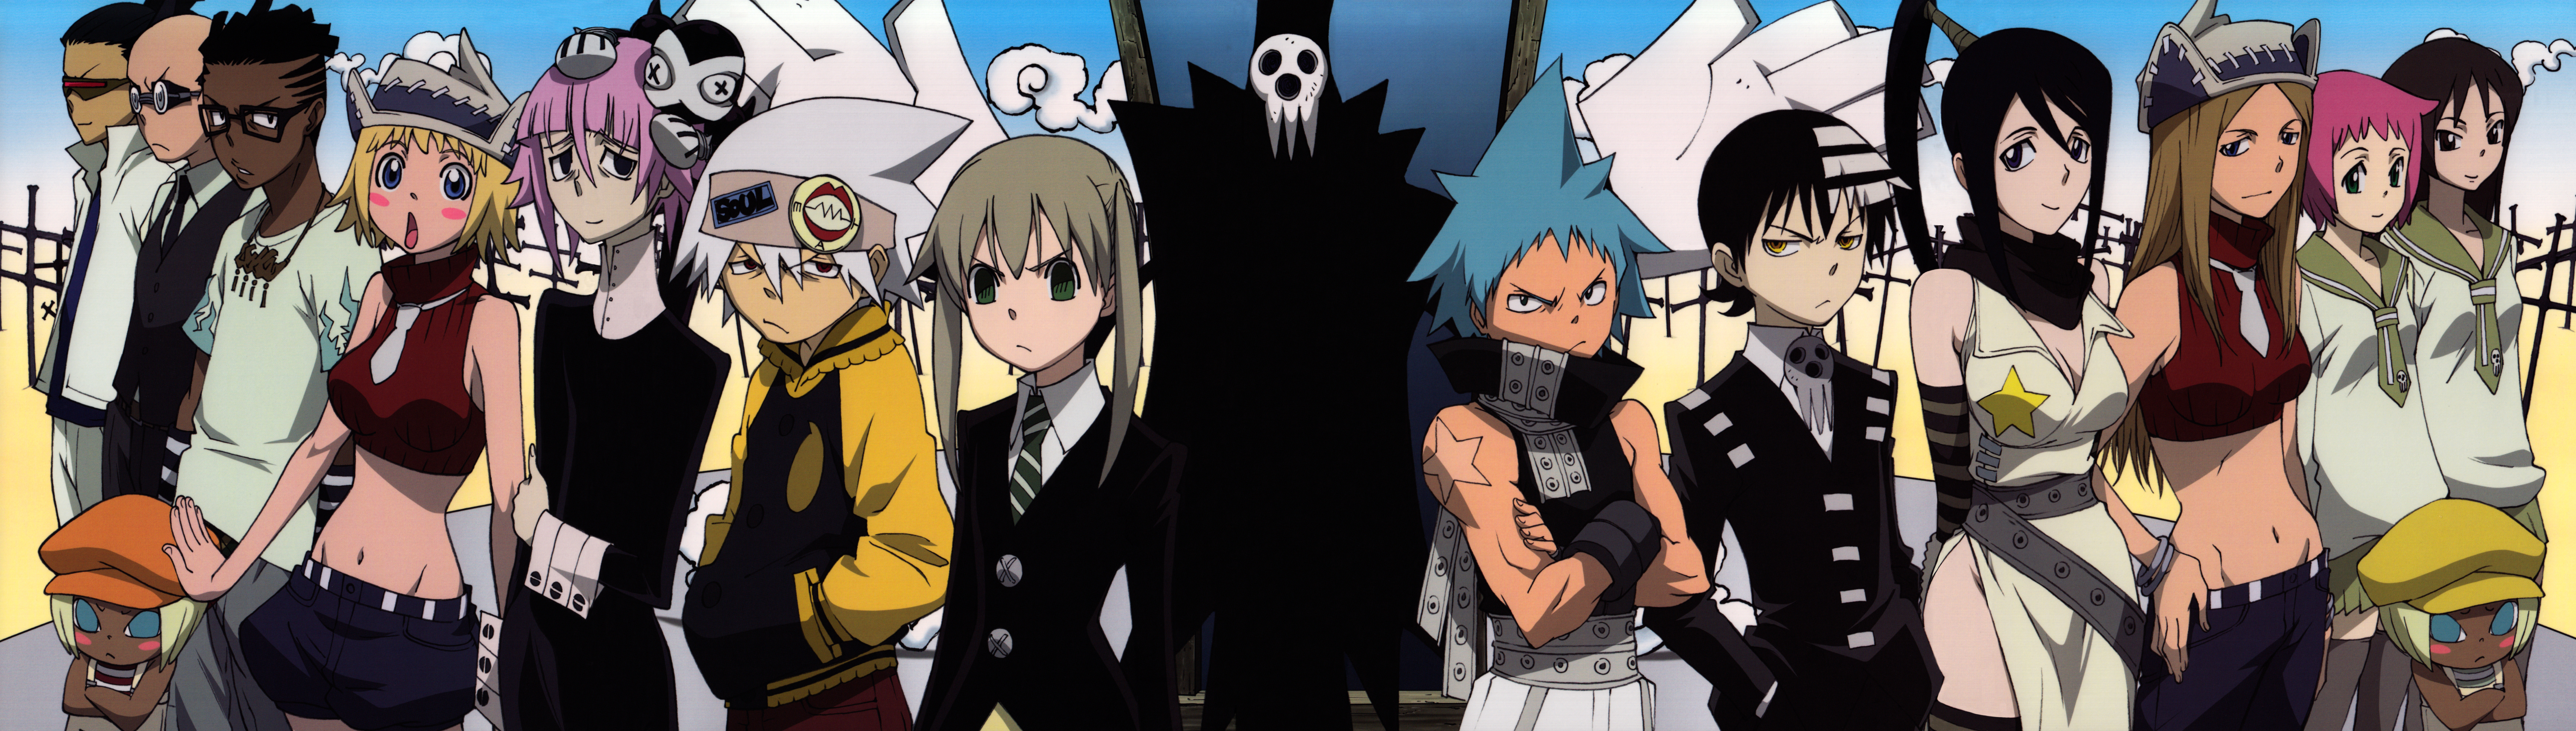 SOUL EATER THE MADNESS RETURNS!! 2, a roleplay on RPG